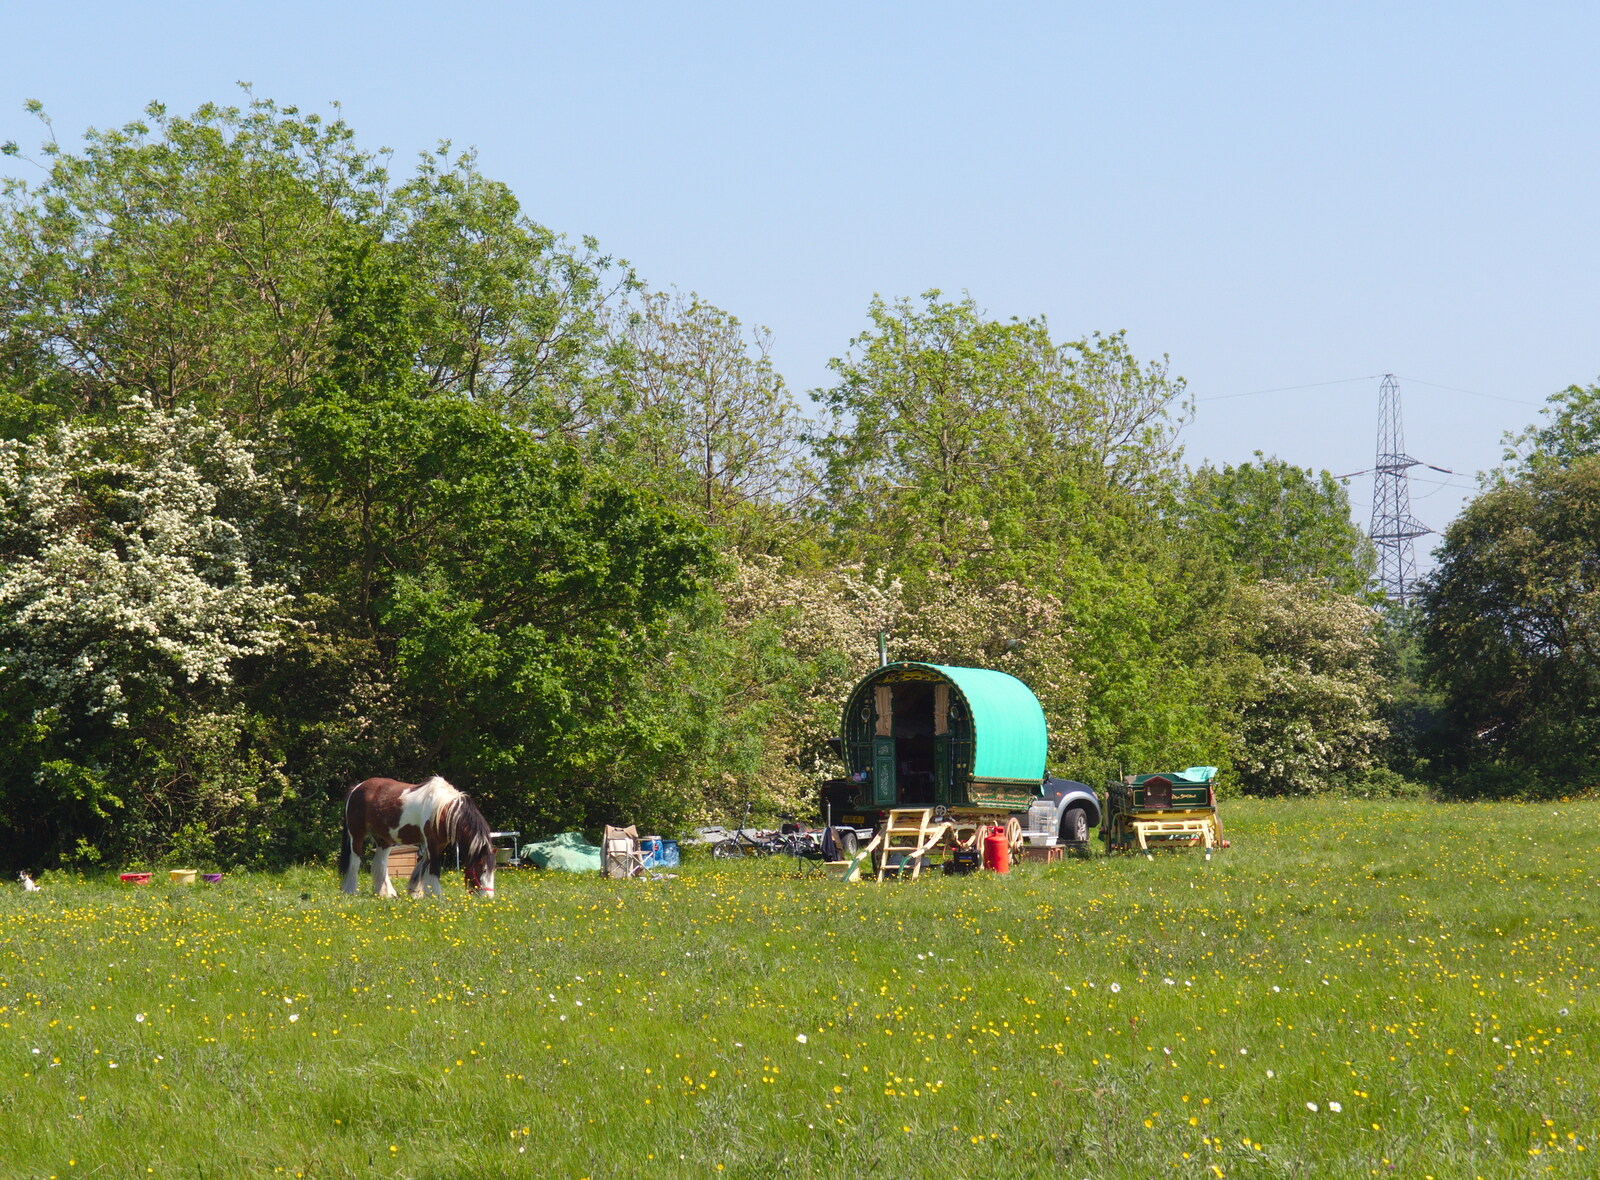 A Gypsy caravan and horse on the common from Thornham Four Horseshoes, and the Oaksmere, Brome, Suffolk - 17th May 2014